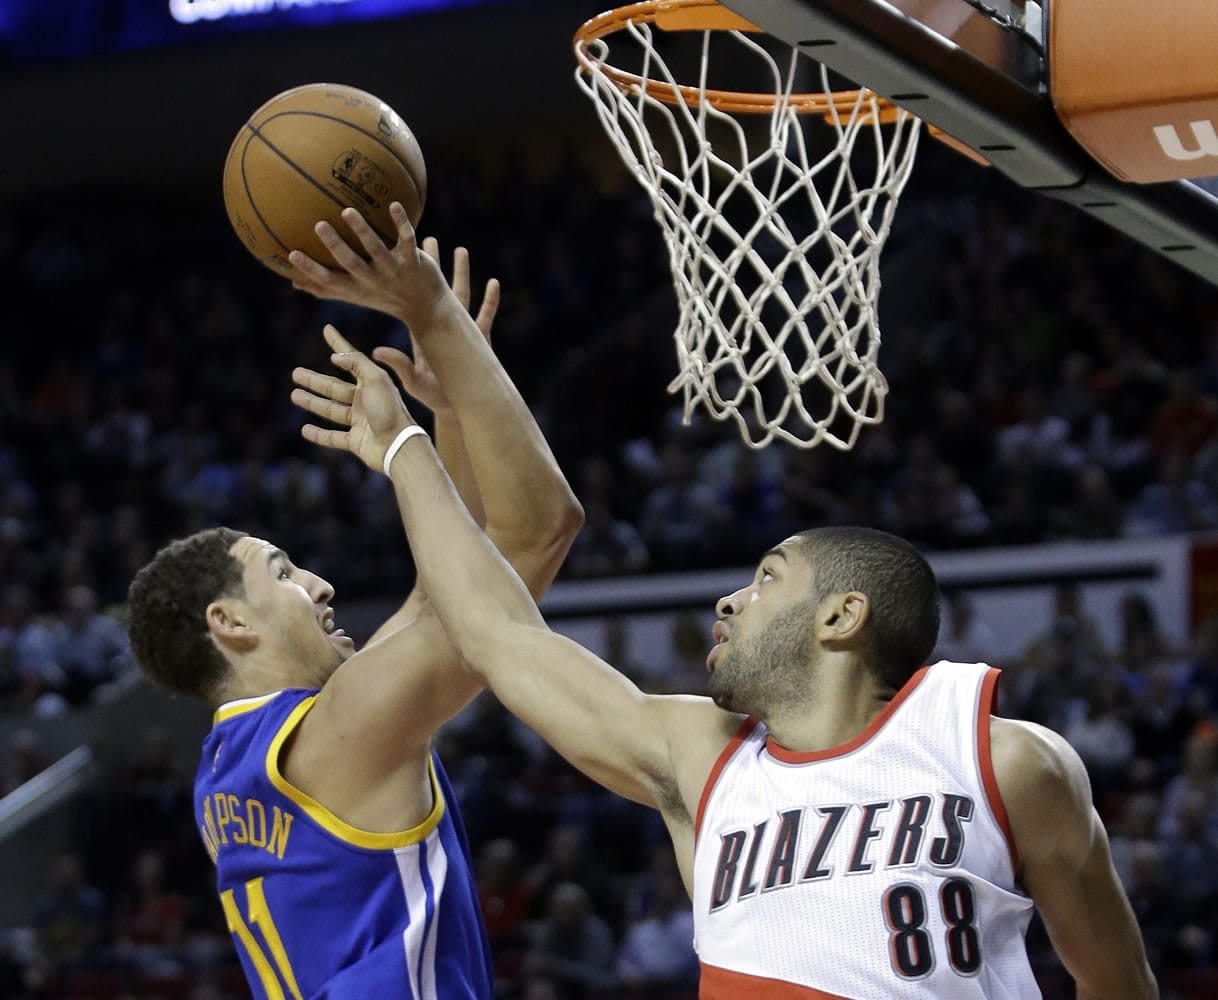 Golden State Warriors guard Klay Thompson, left, goes to the hoop against Portland Trail Blazers forward Nicolas Batum during the first half in Portland, Ore., Sunday, Nov. 2, 2014.